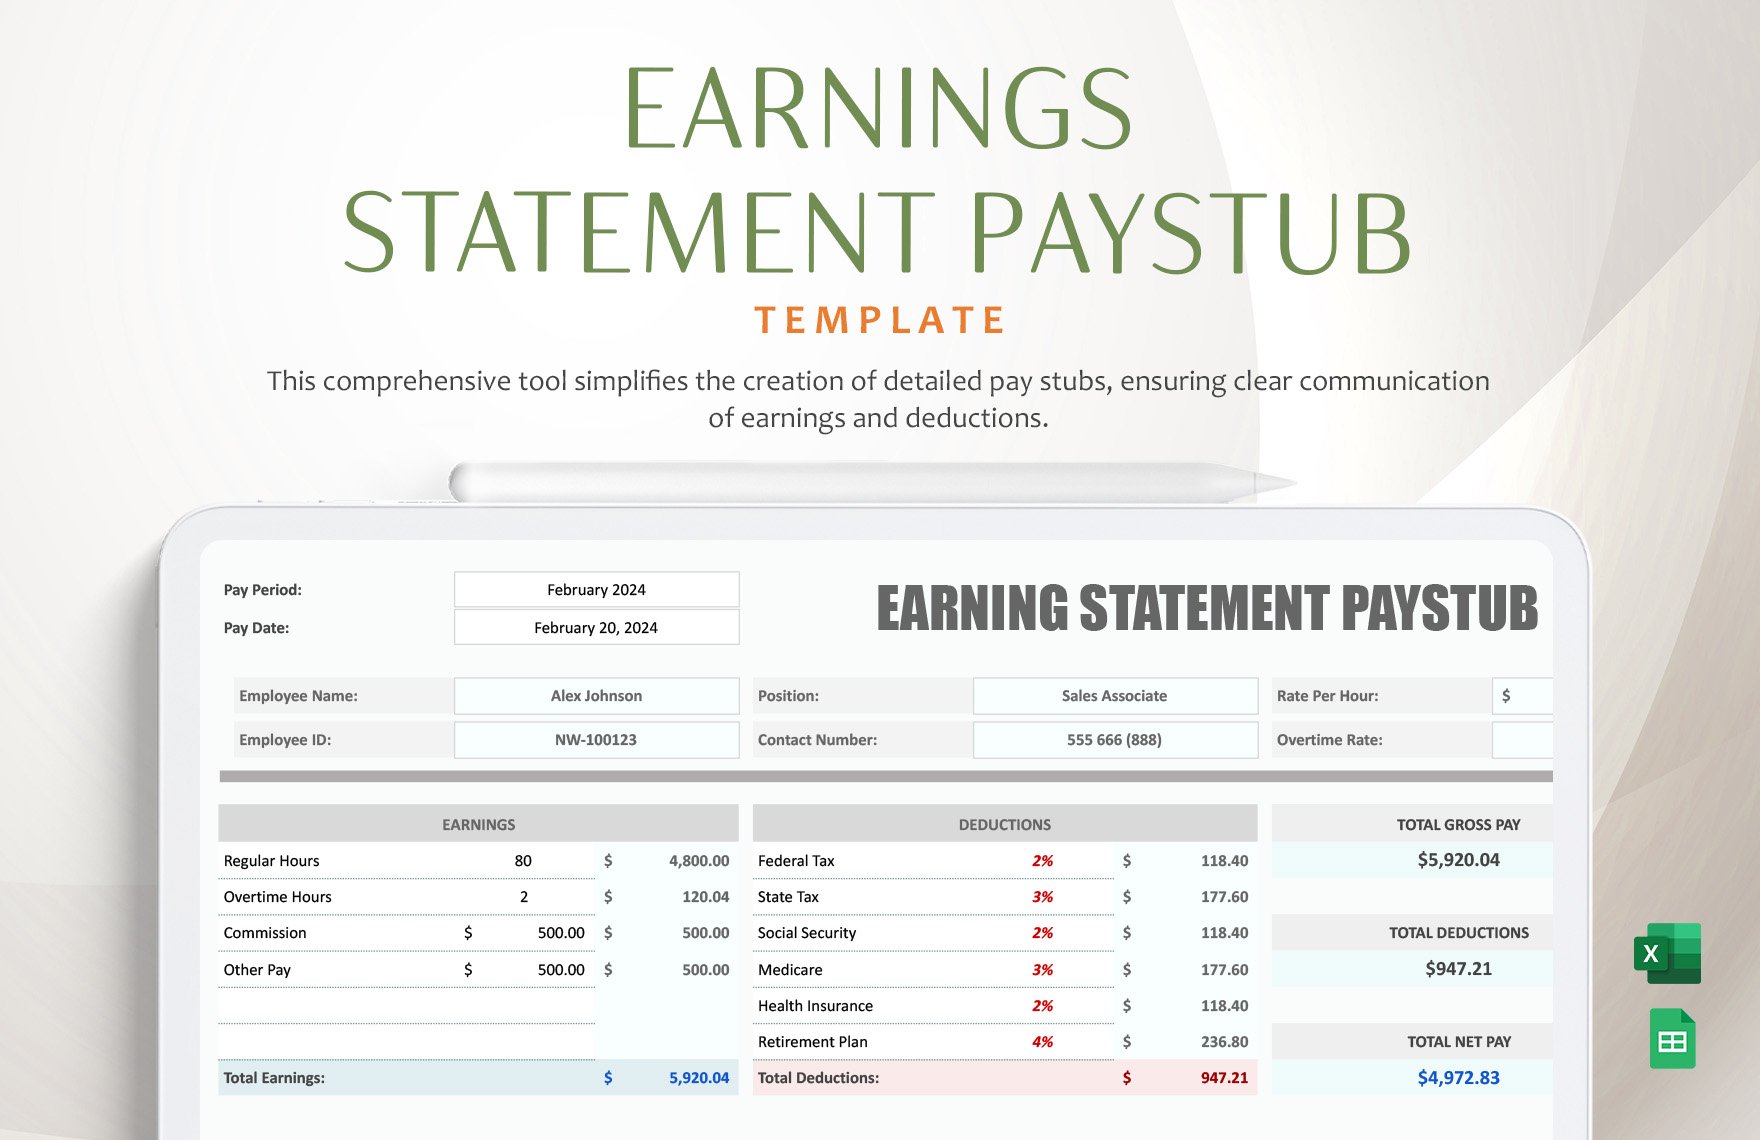 Earnings Statement Paystub Template in Excel, Google Sheets